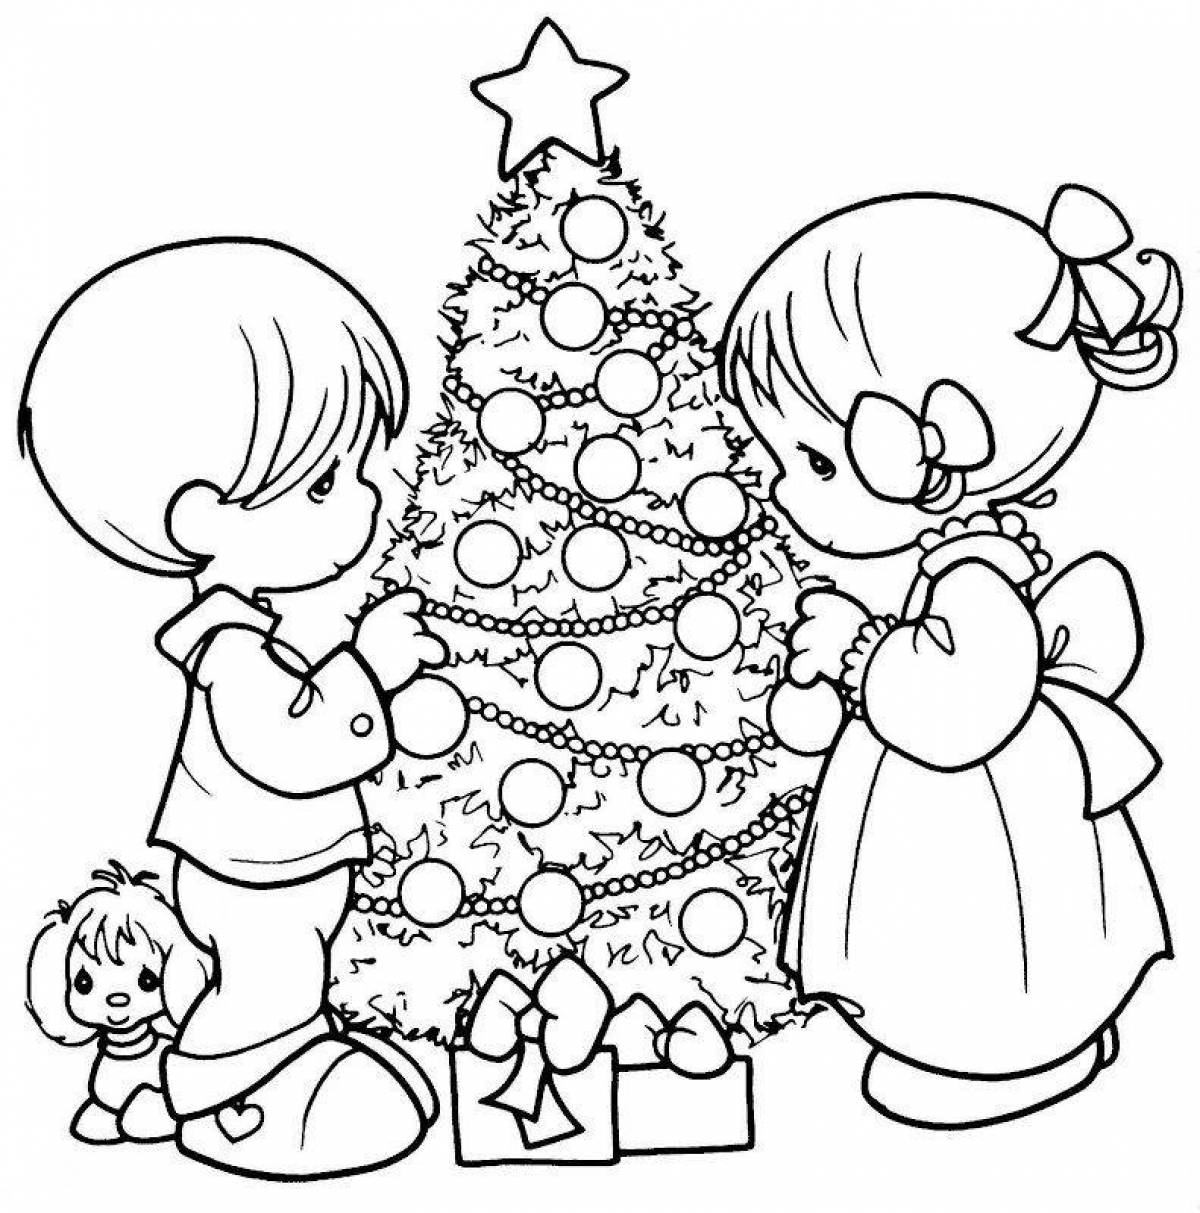 Exciting Christmas coloring book for 6-7 year olds